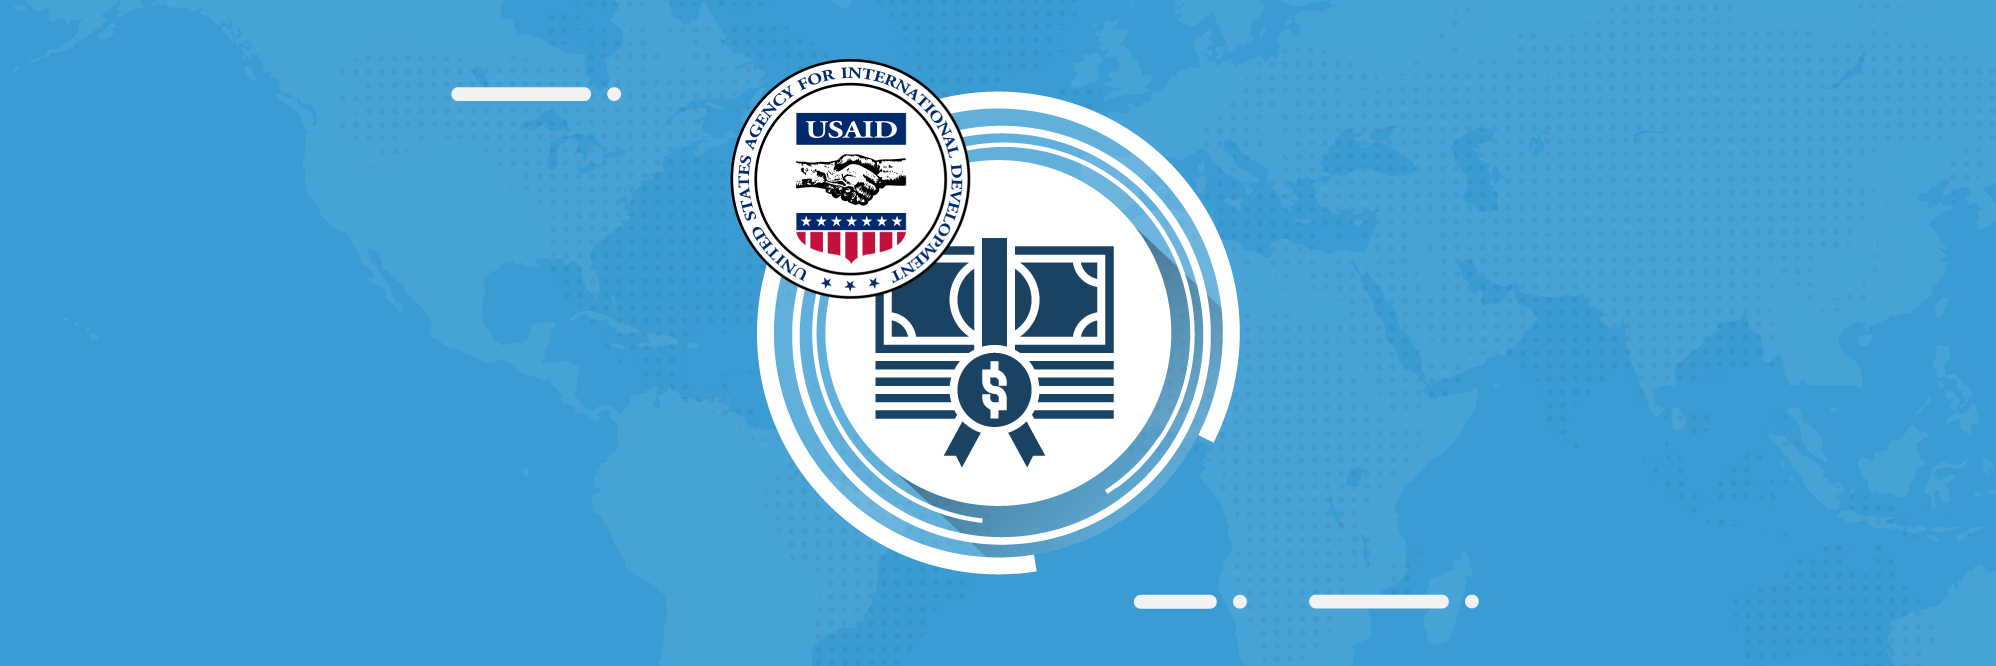 USAID calls for grant applications